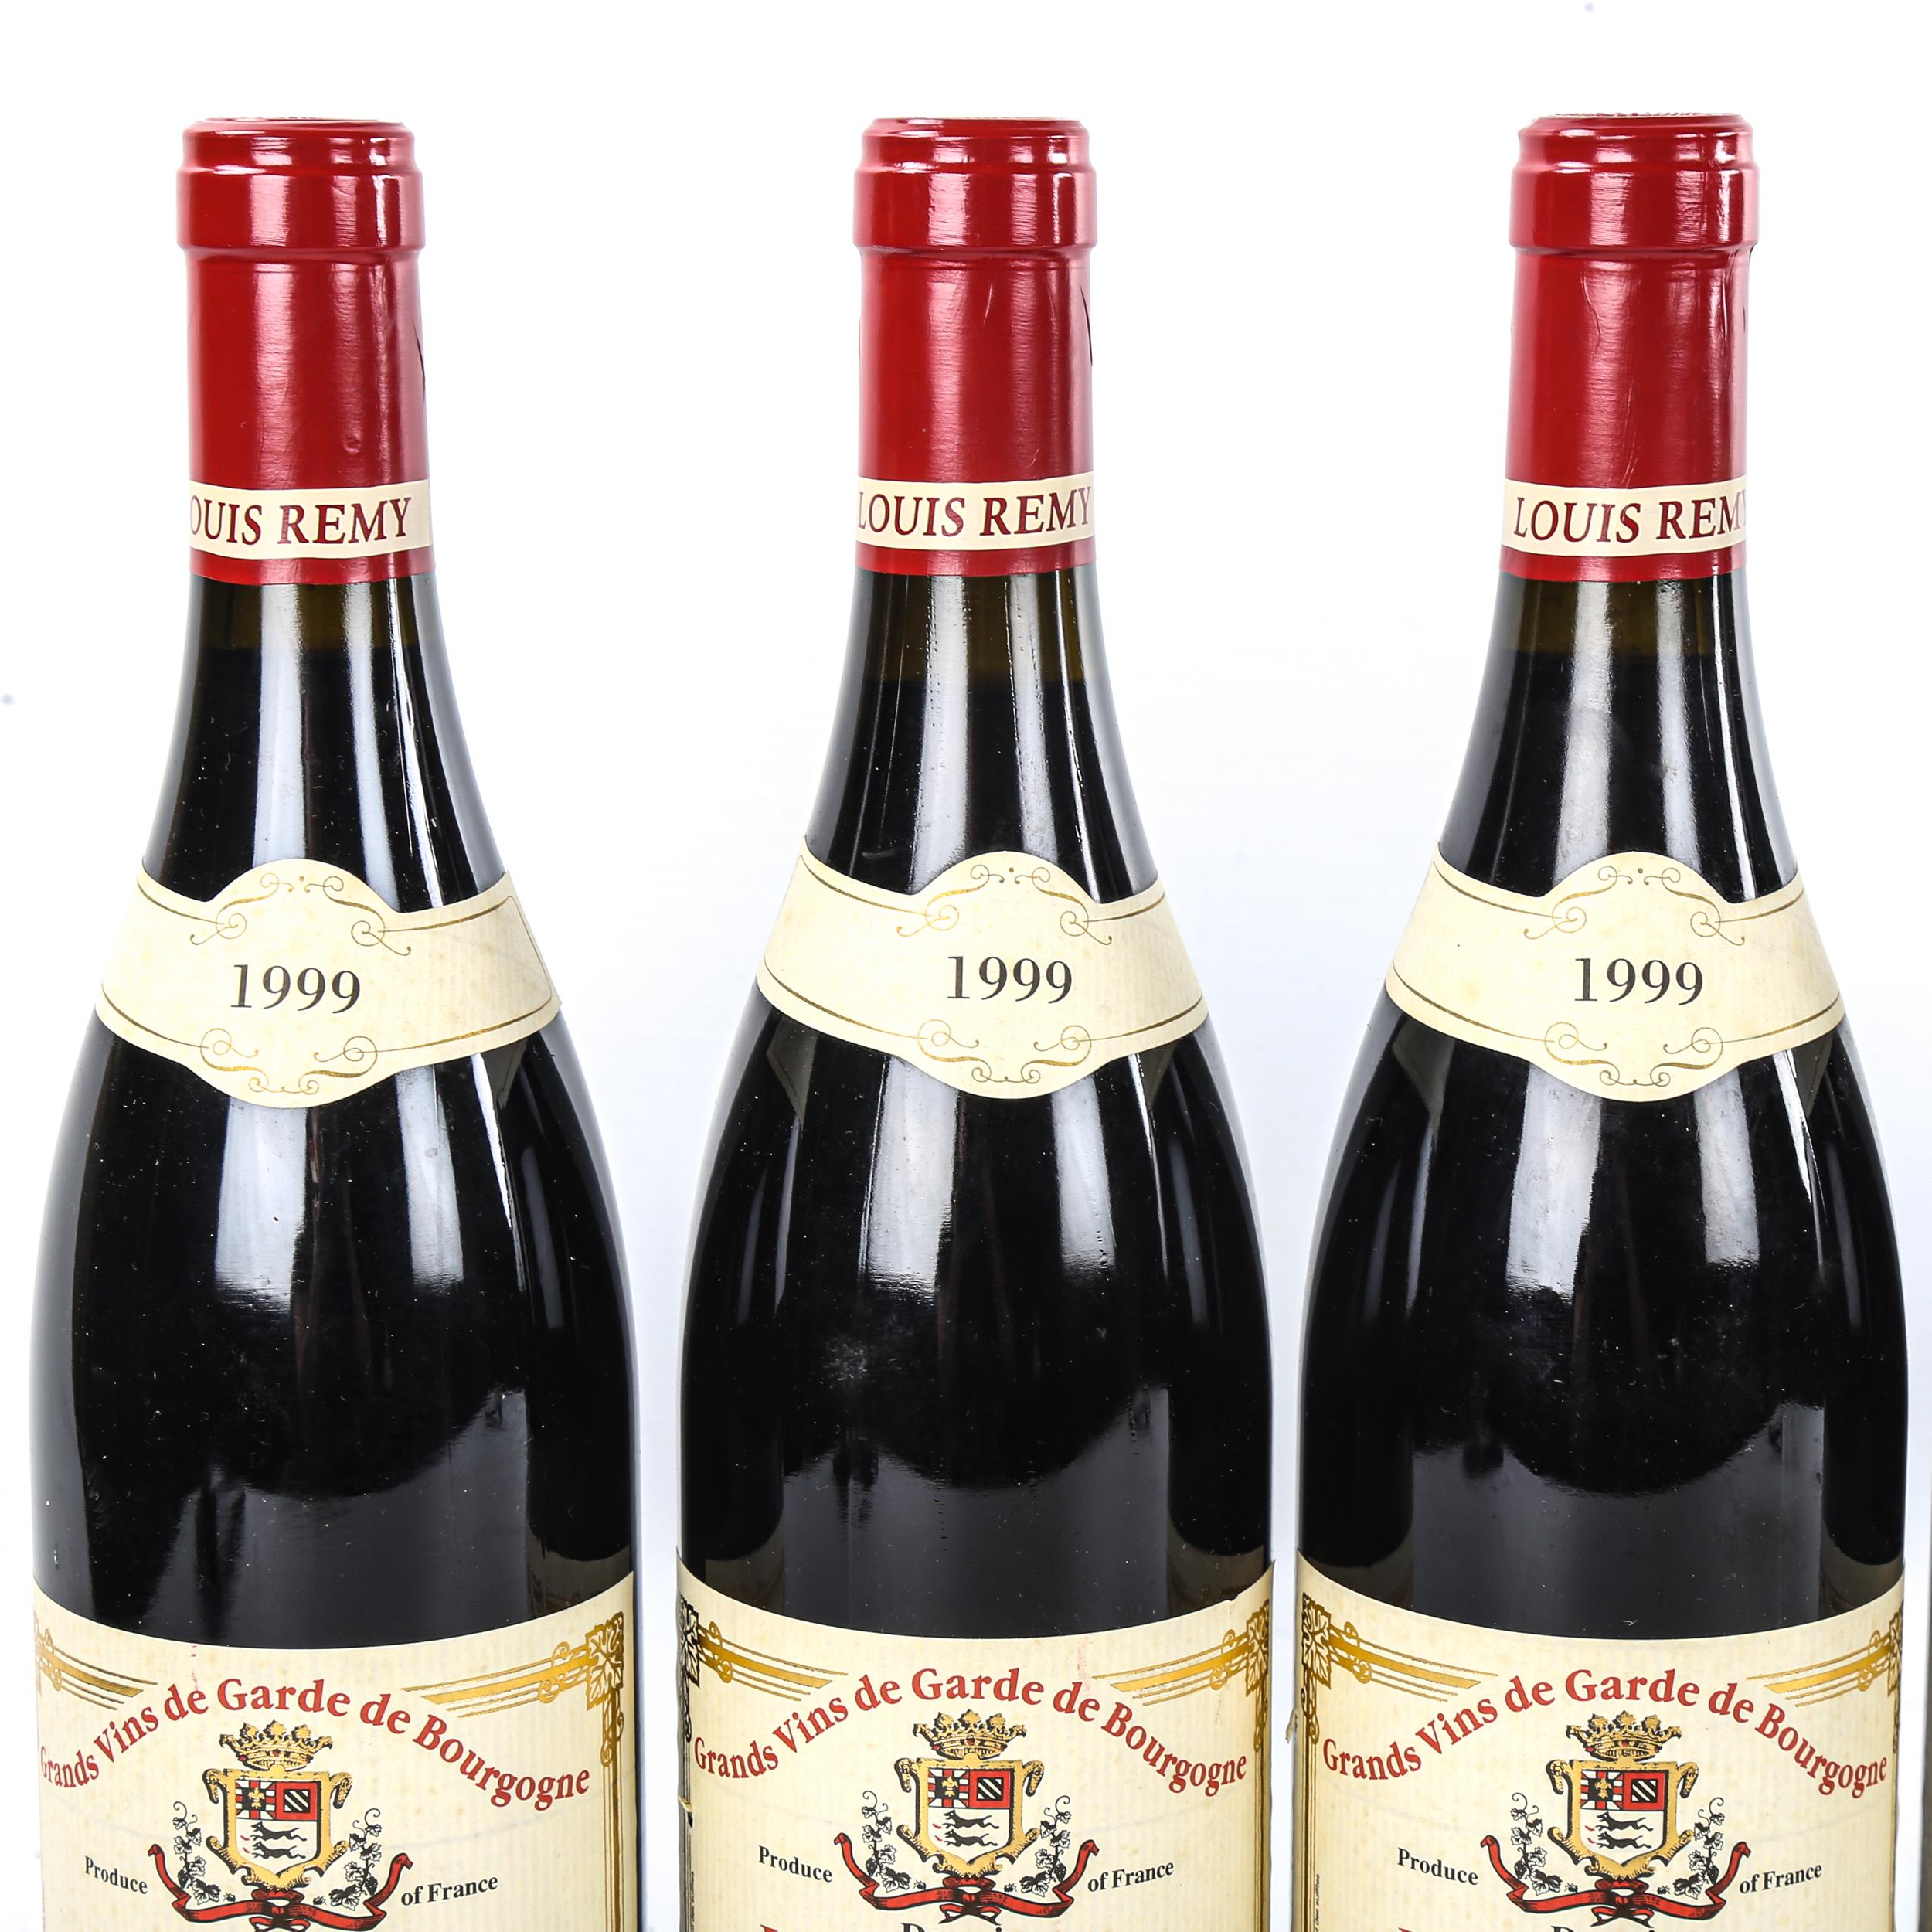 5 bottles of Burgundy wine, 1999 Domaine Louis Remy Latricieres-Chambertin Grand Cru - Image 2 of 3